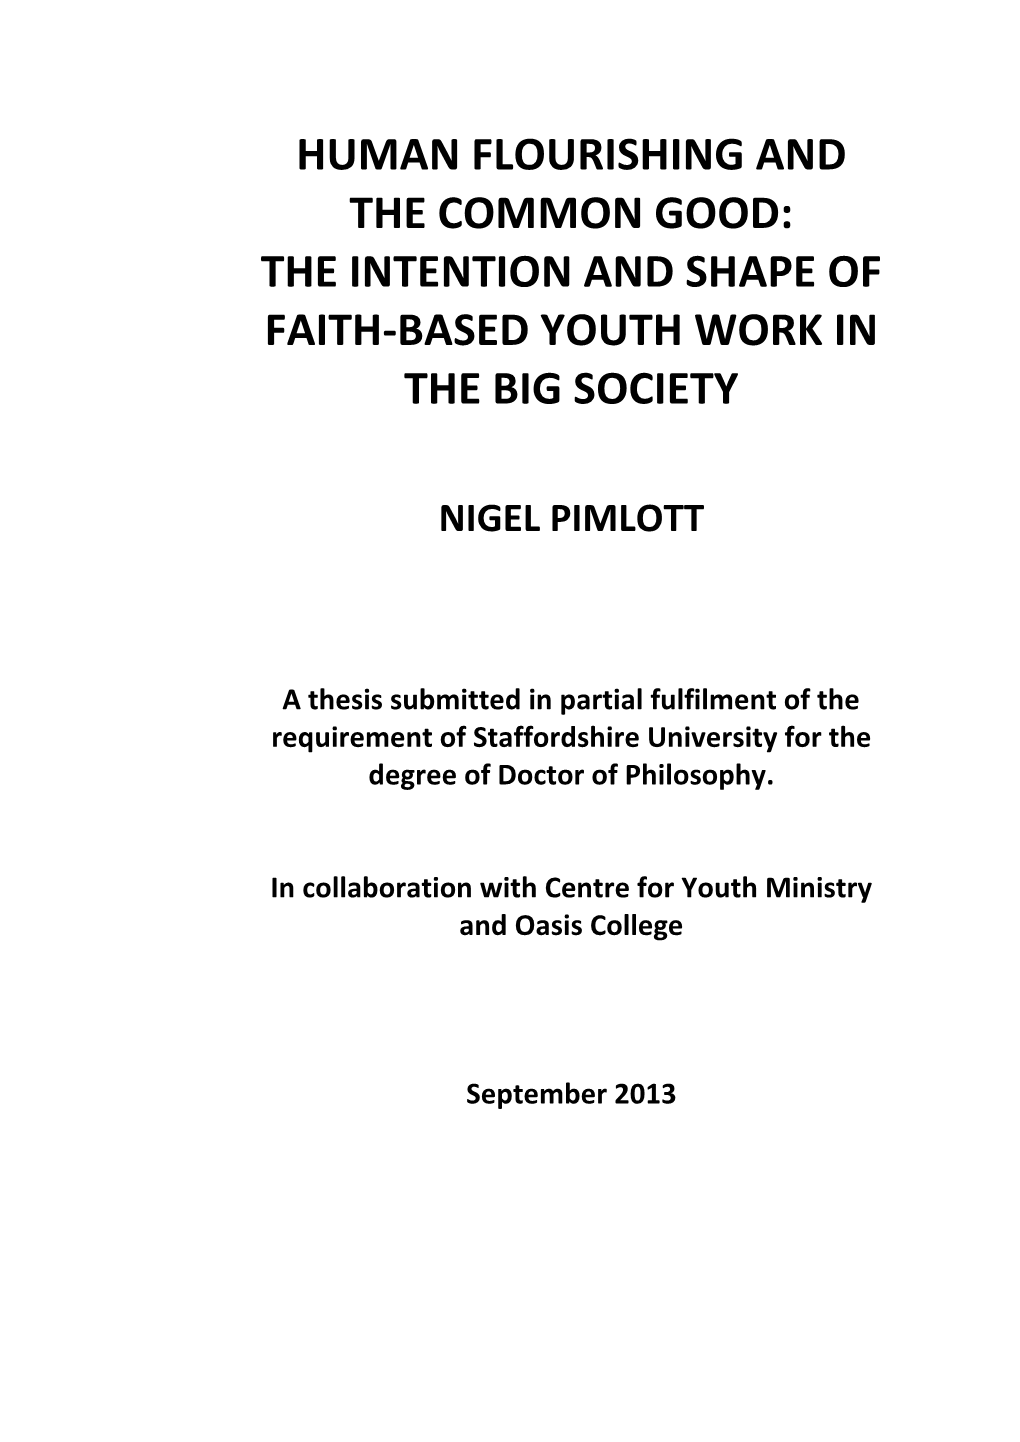 The Intention and Shape of Faith-Based Youth Work in the Big Society